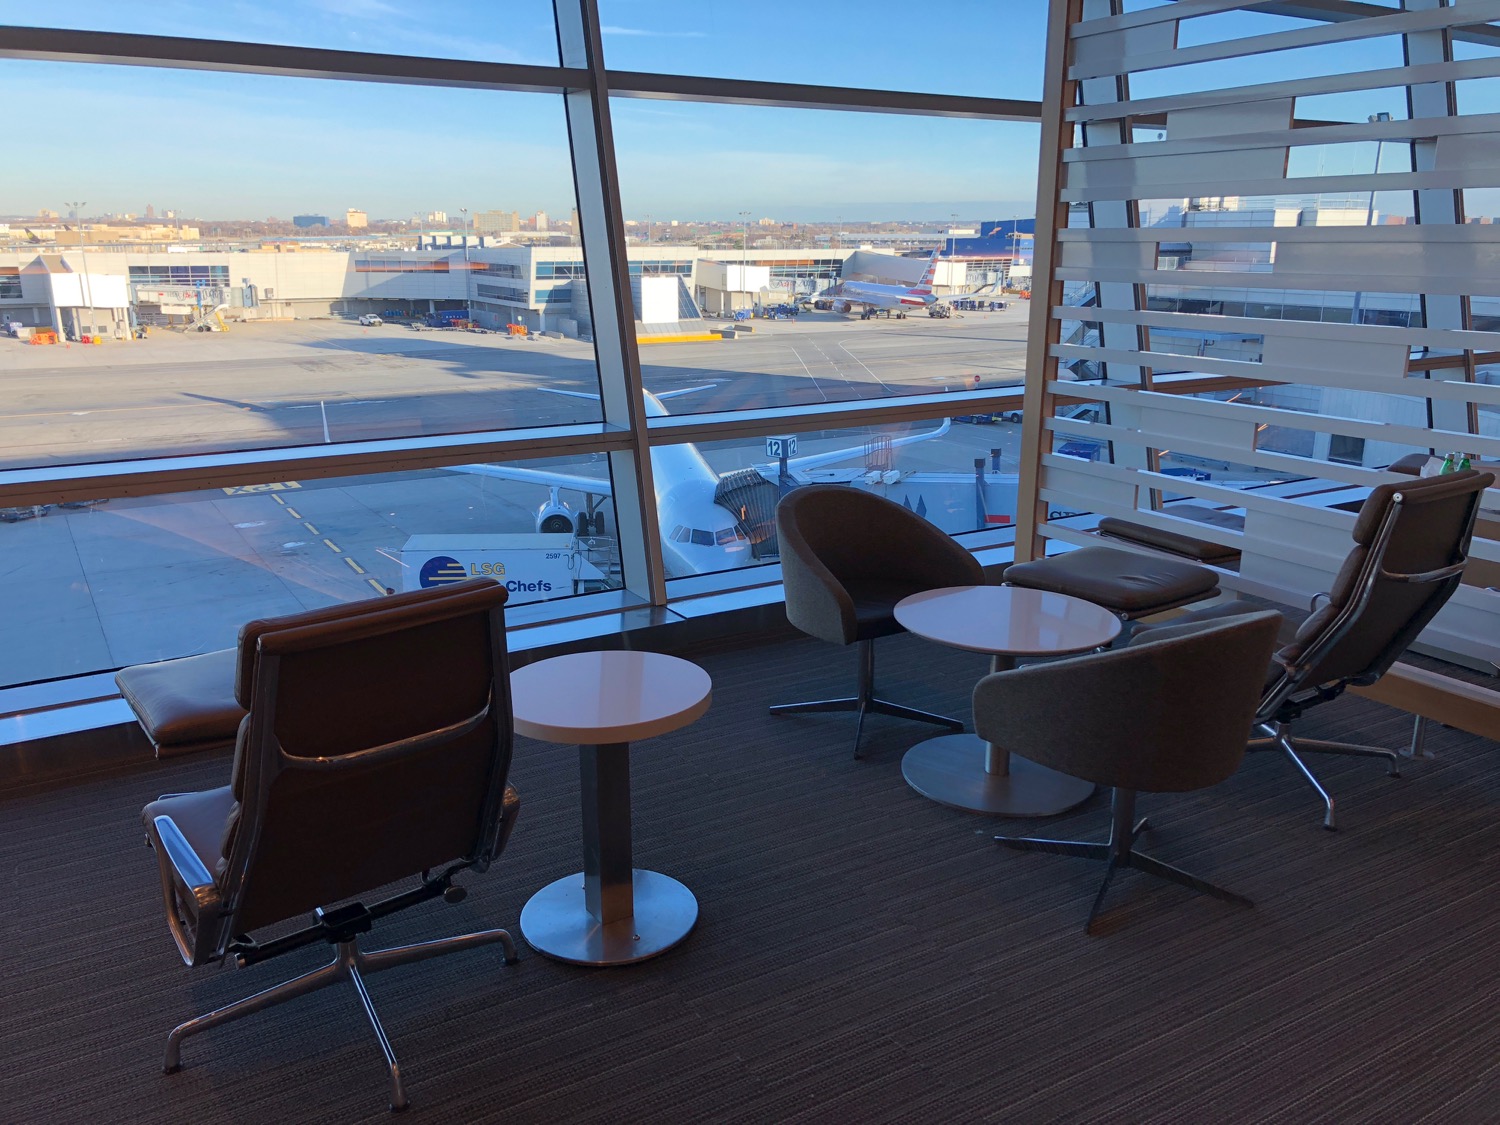 a room with chairs and tables and a window with a view of an airport